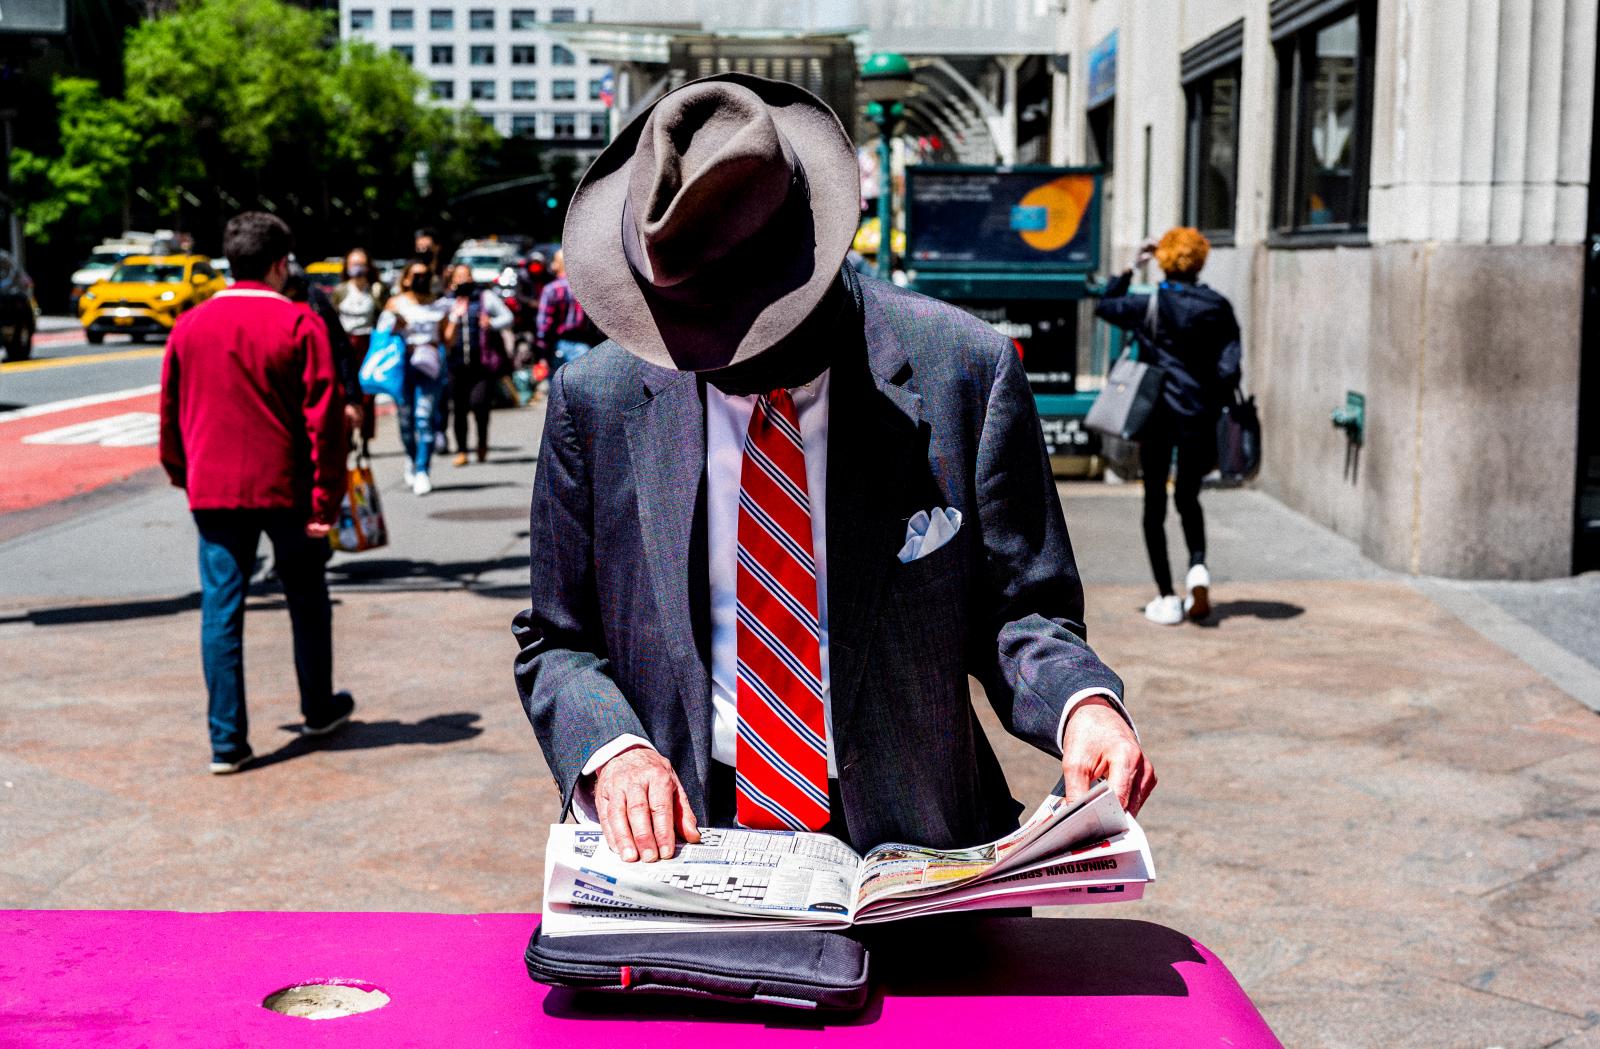 Street Photography/Color Works -  Old-school reading a Newspaper  34th Street/Midtown,...